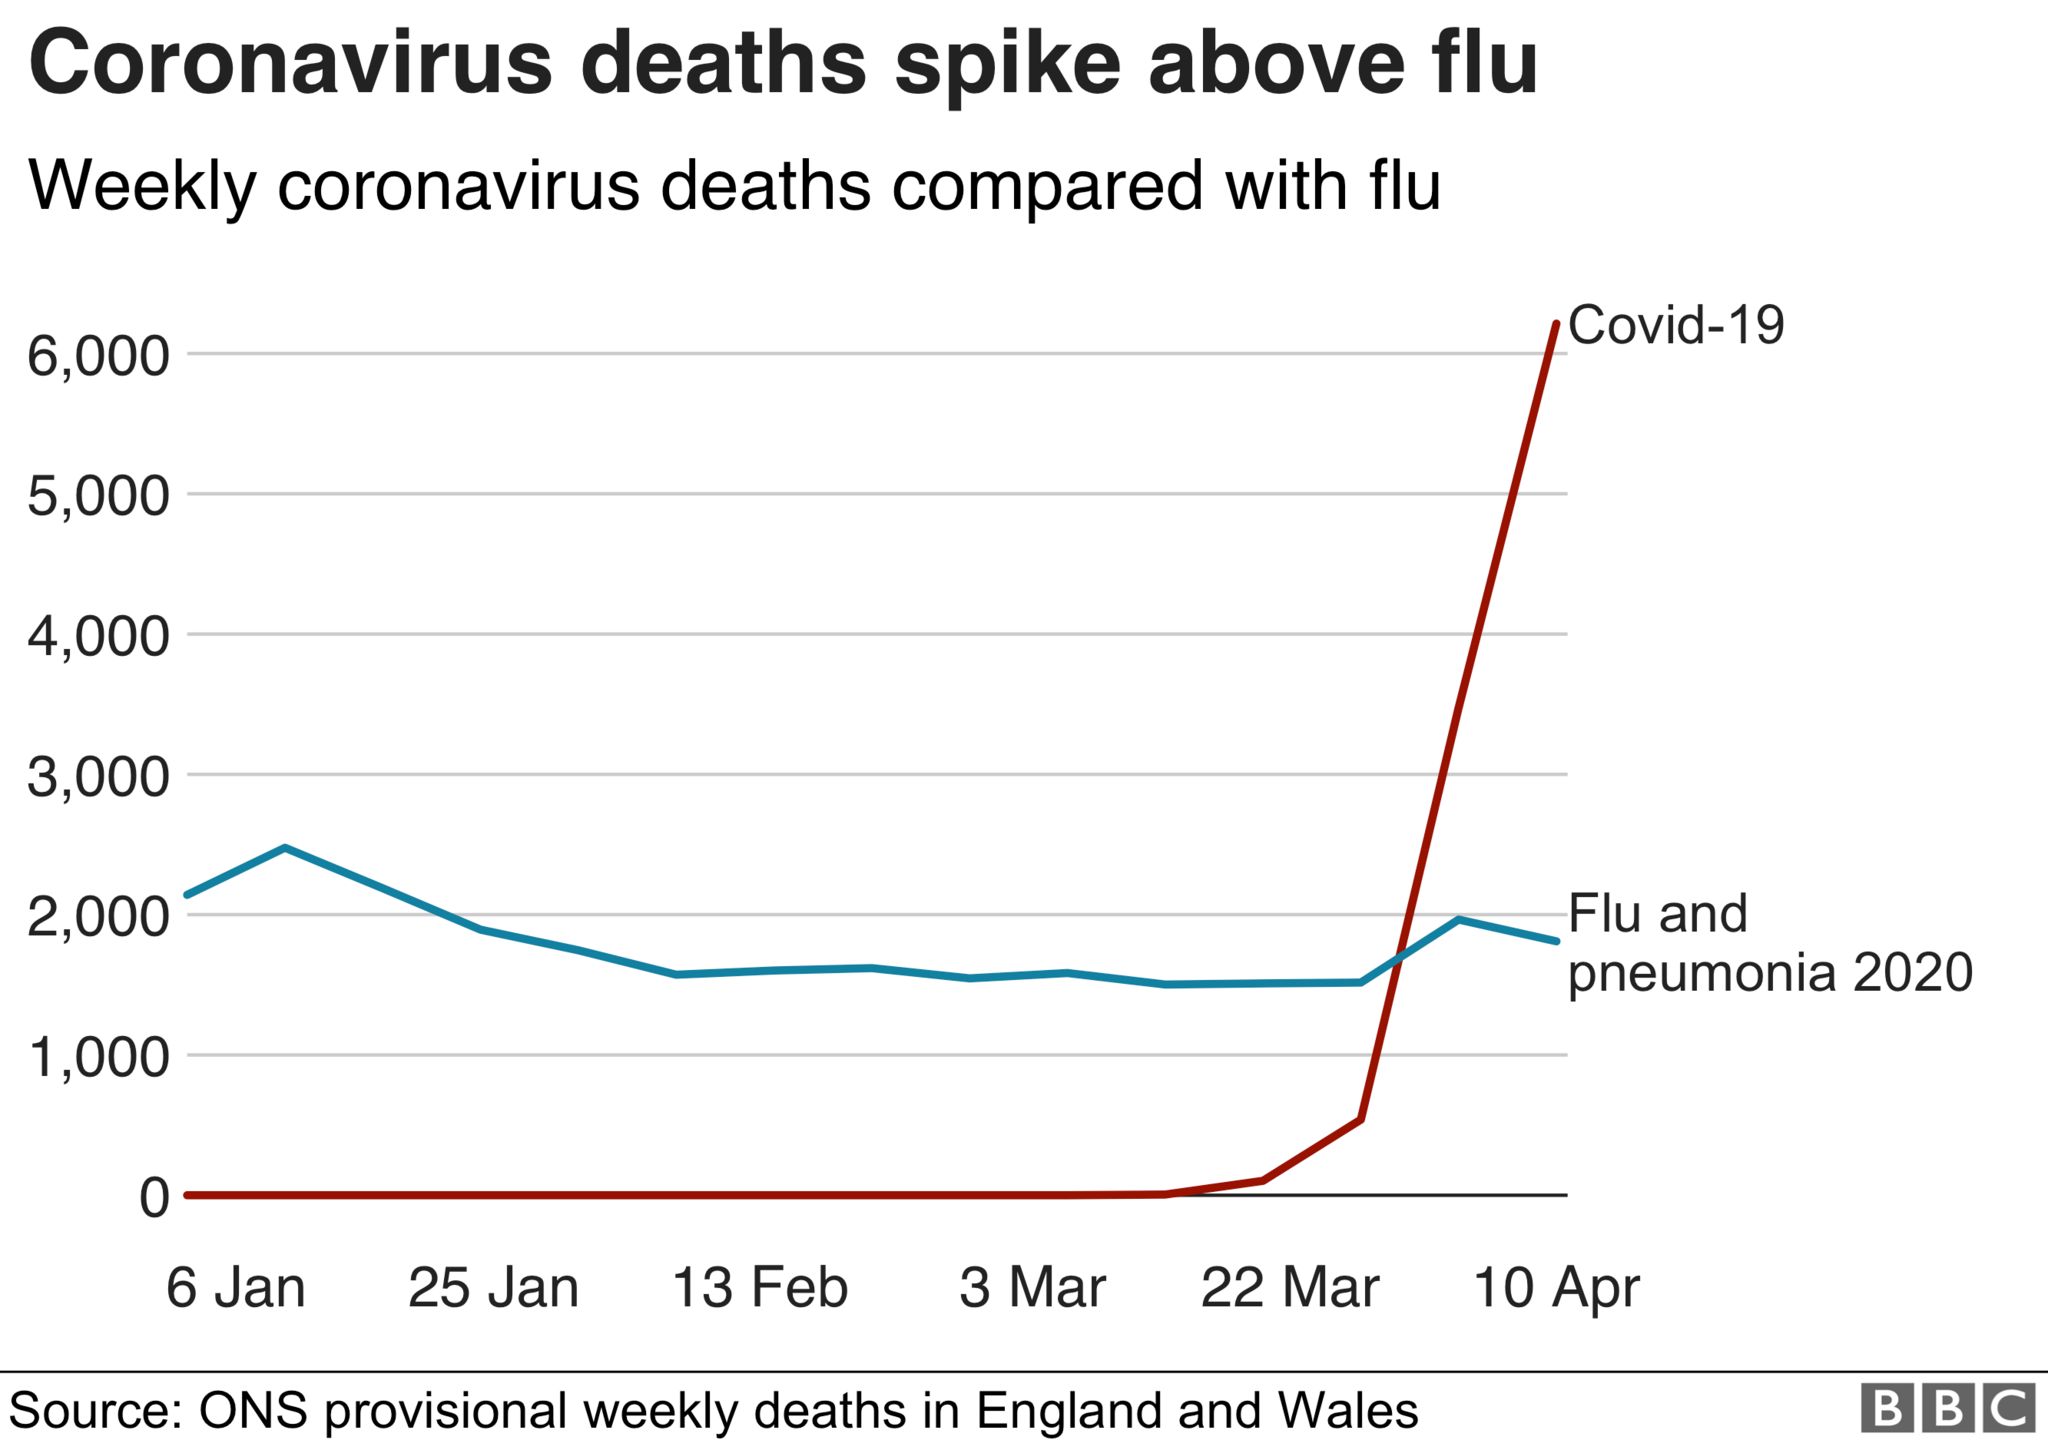 hiw many deaths from covid vaccine